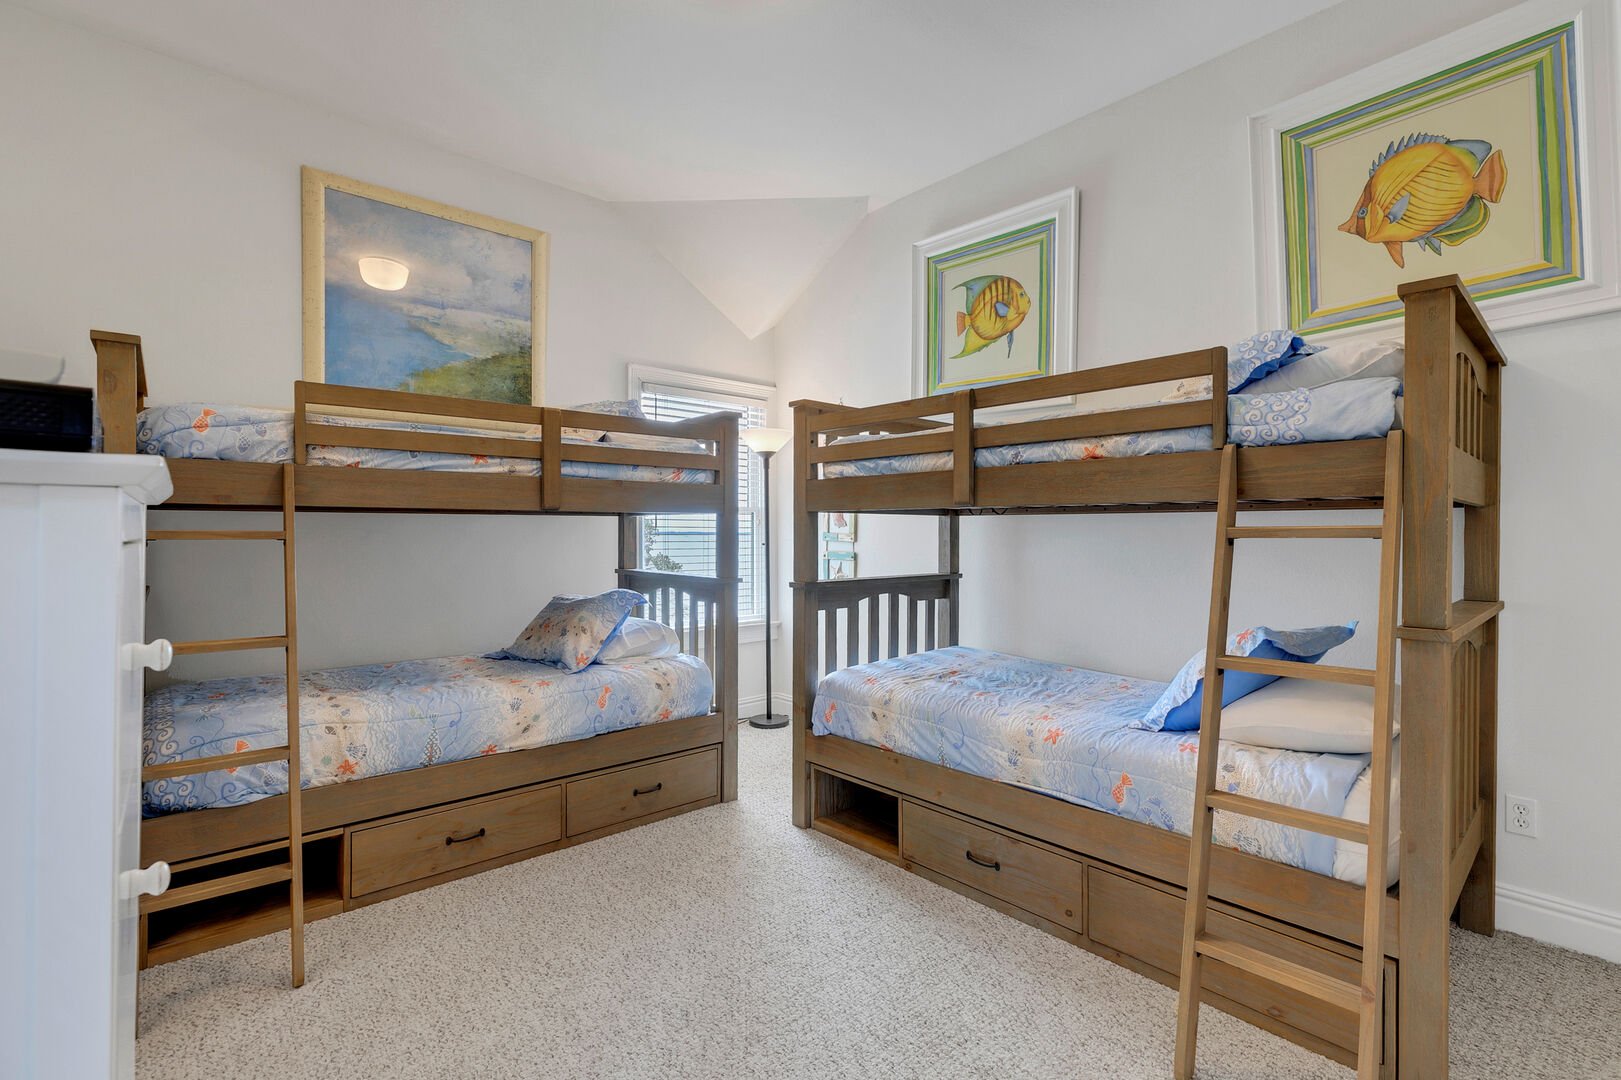 Two Bunk Bed Sets - Top Level